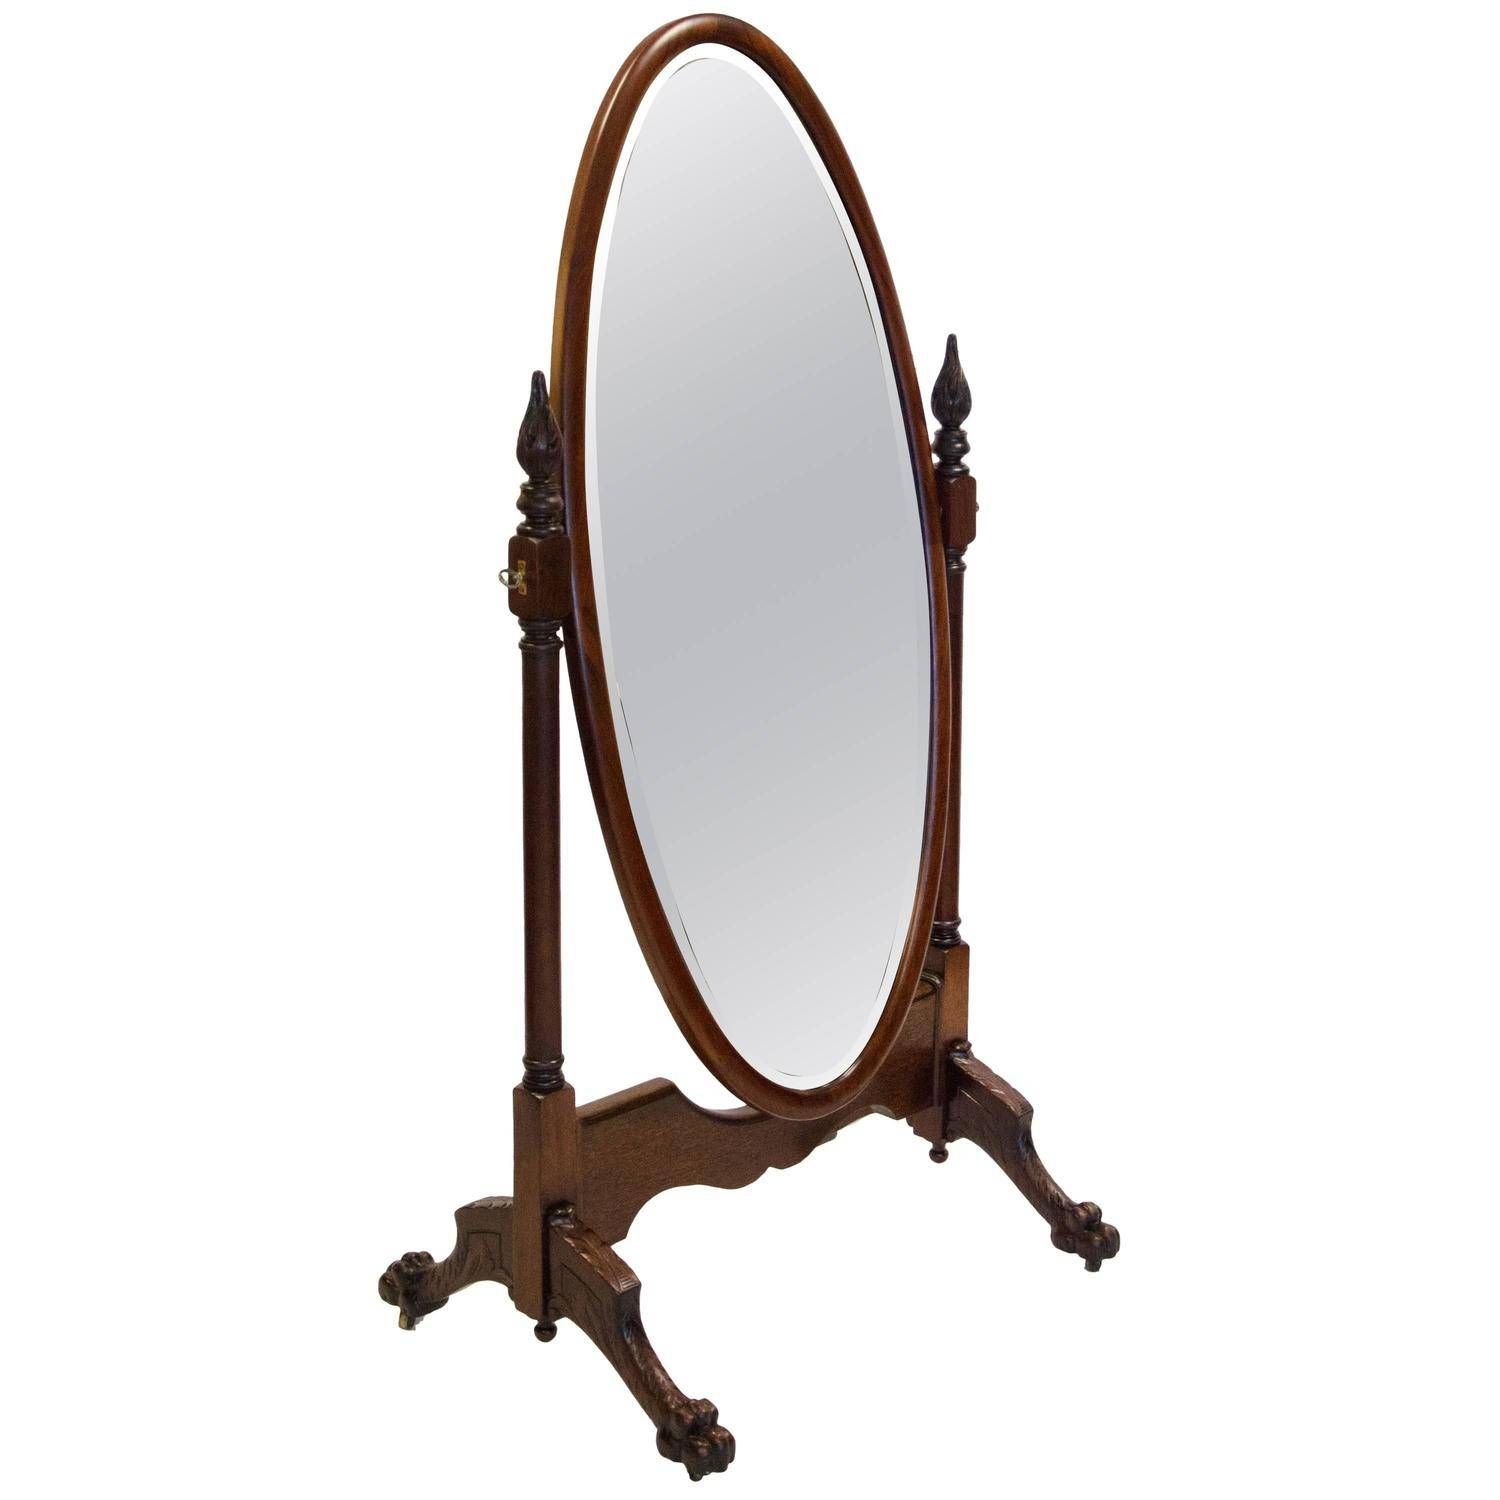 Antique & Vintage Floor Mirrors And Full Length Mirrors For Sale Intended For Antique Full Length Mirrors (View 6 of 25)